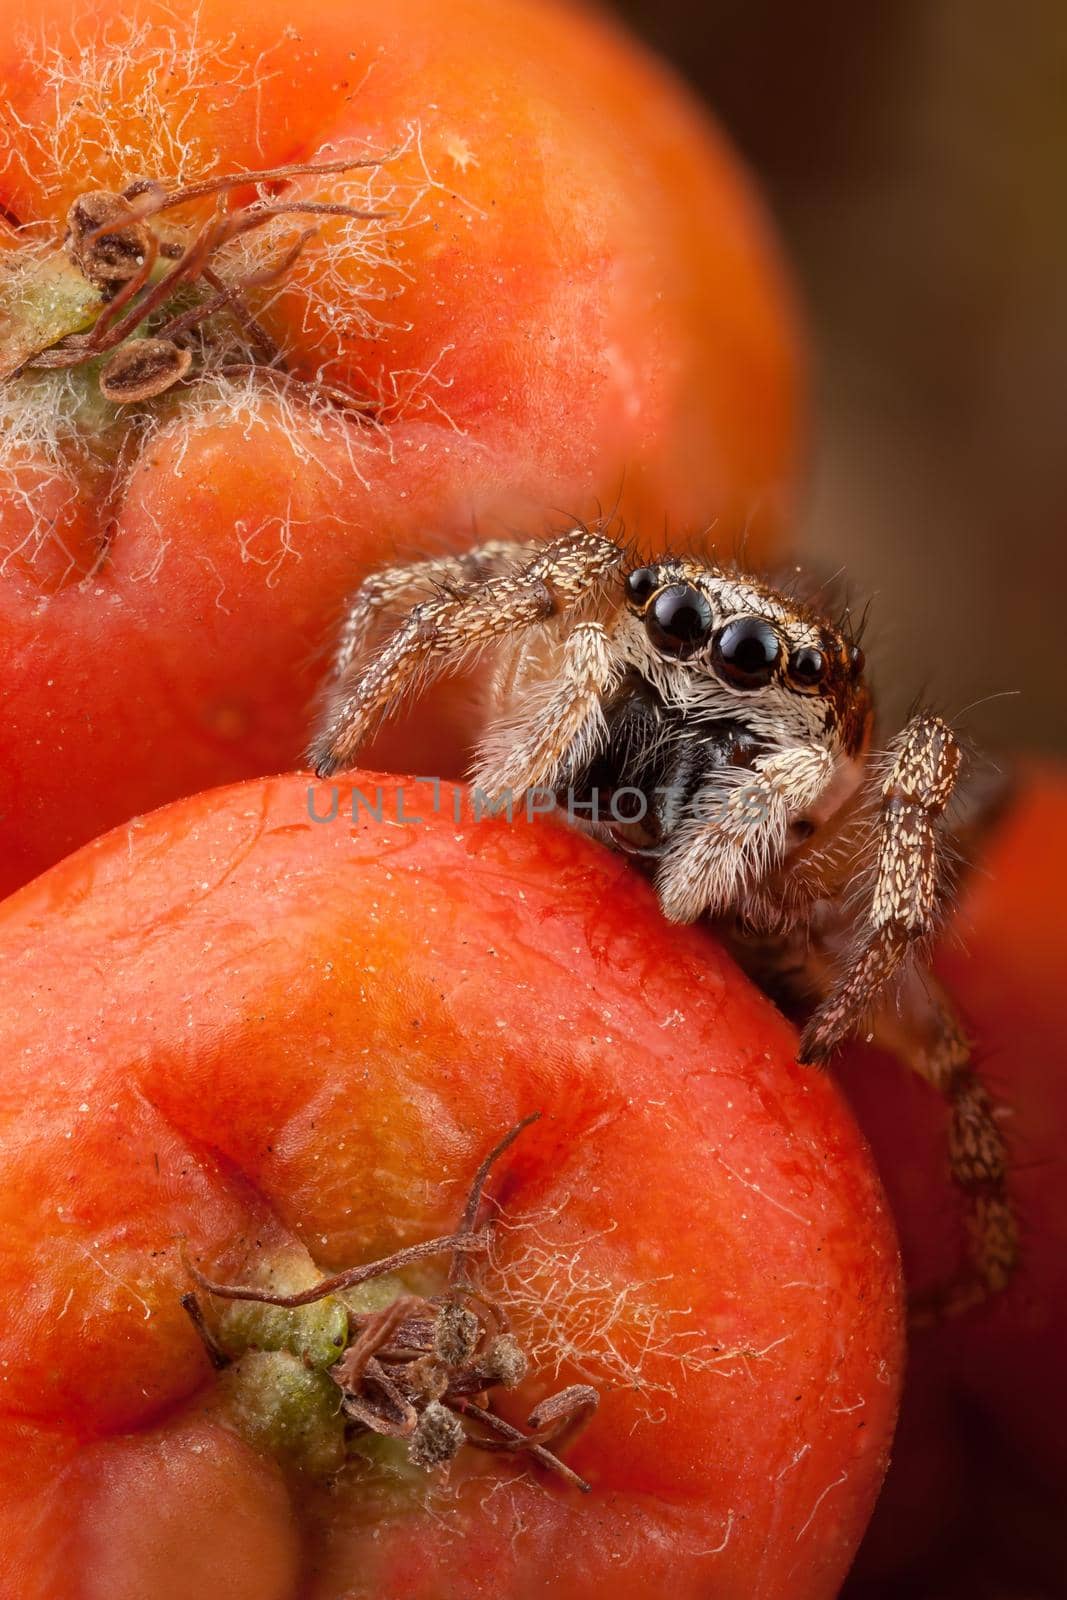 Jumping spider and rowan fruit by Lincikas